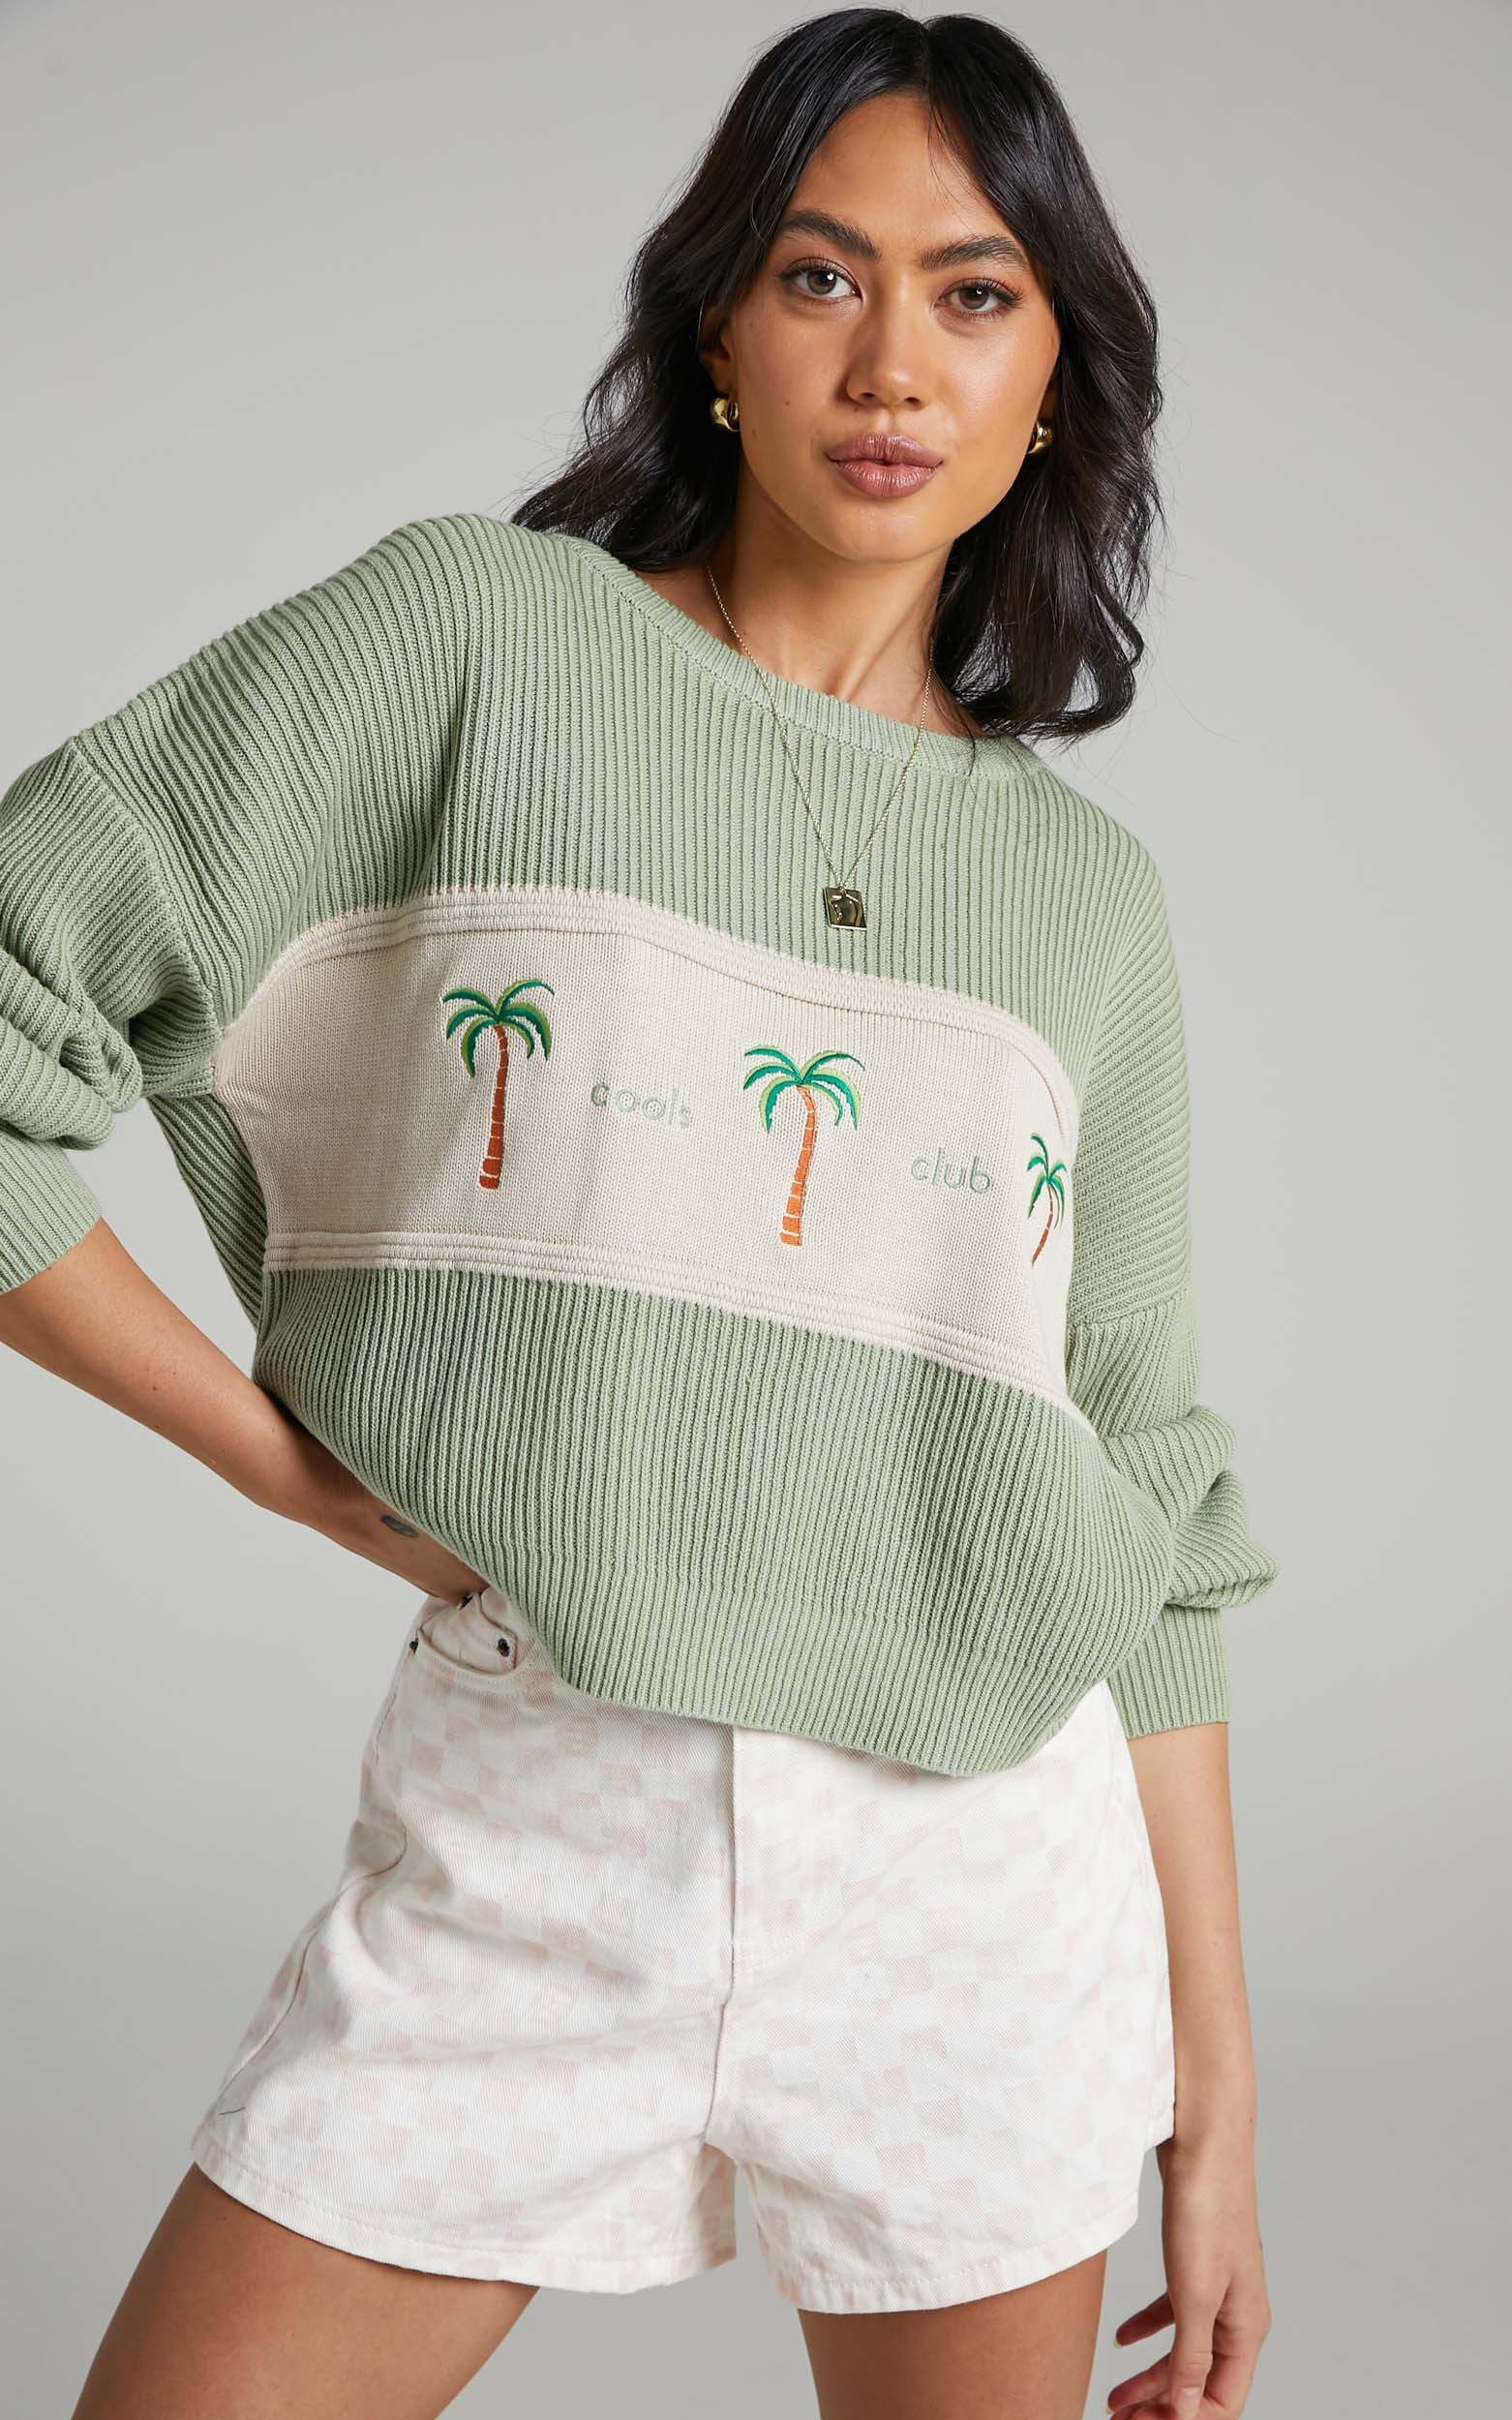 Cools Club - Palm Crew Knit in Seagrass - 06, GRN1, hi-res image number null